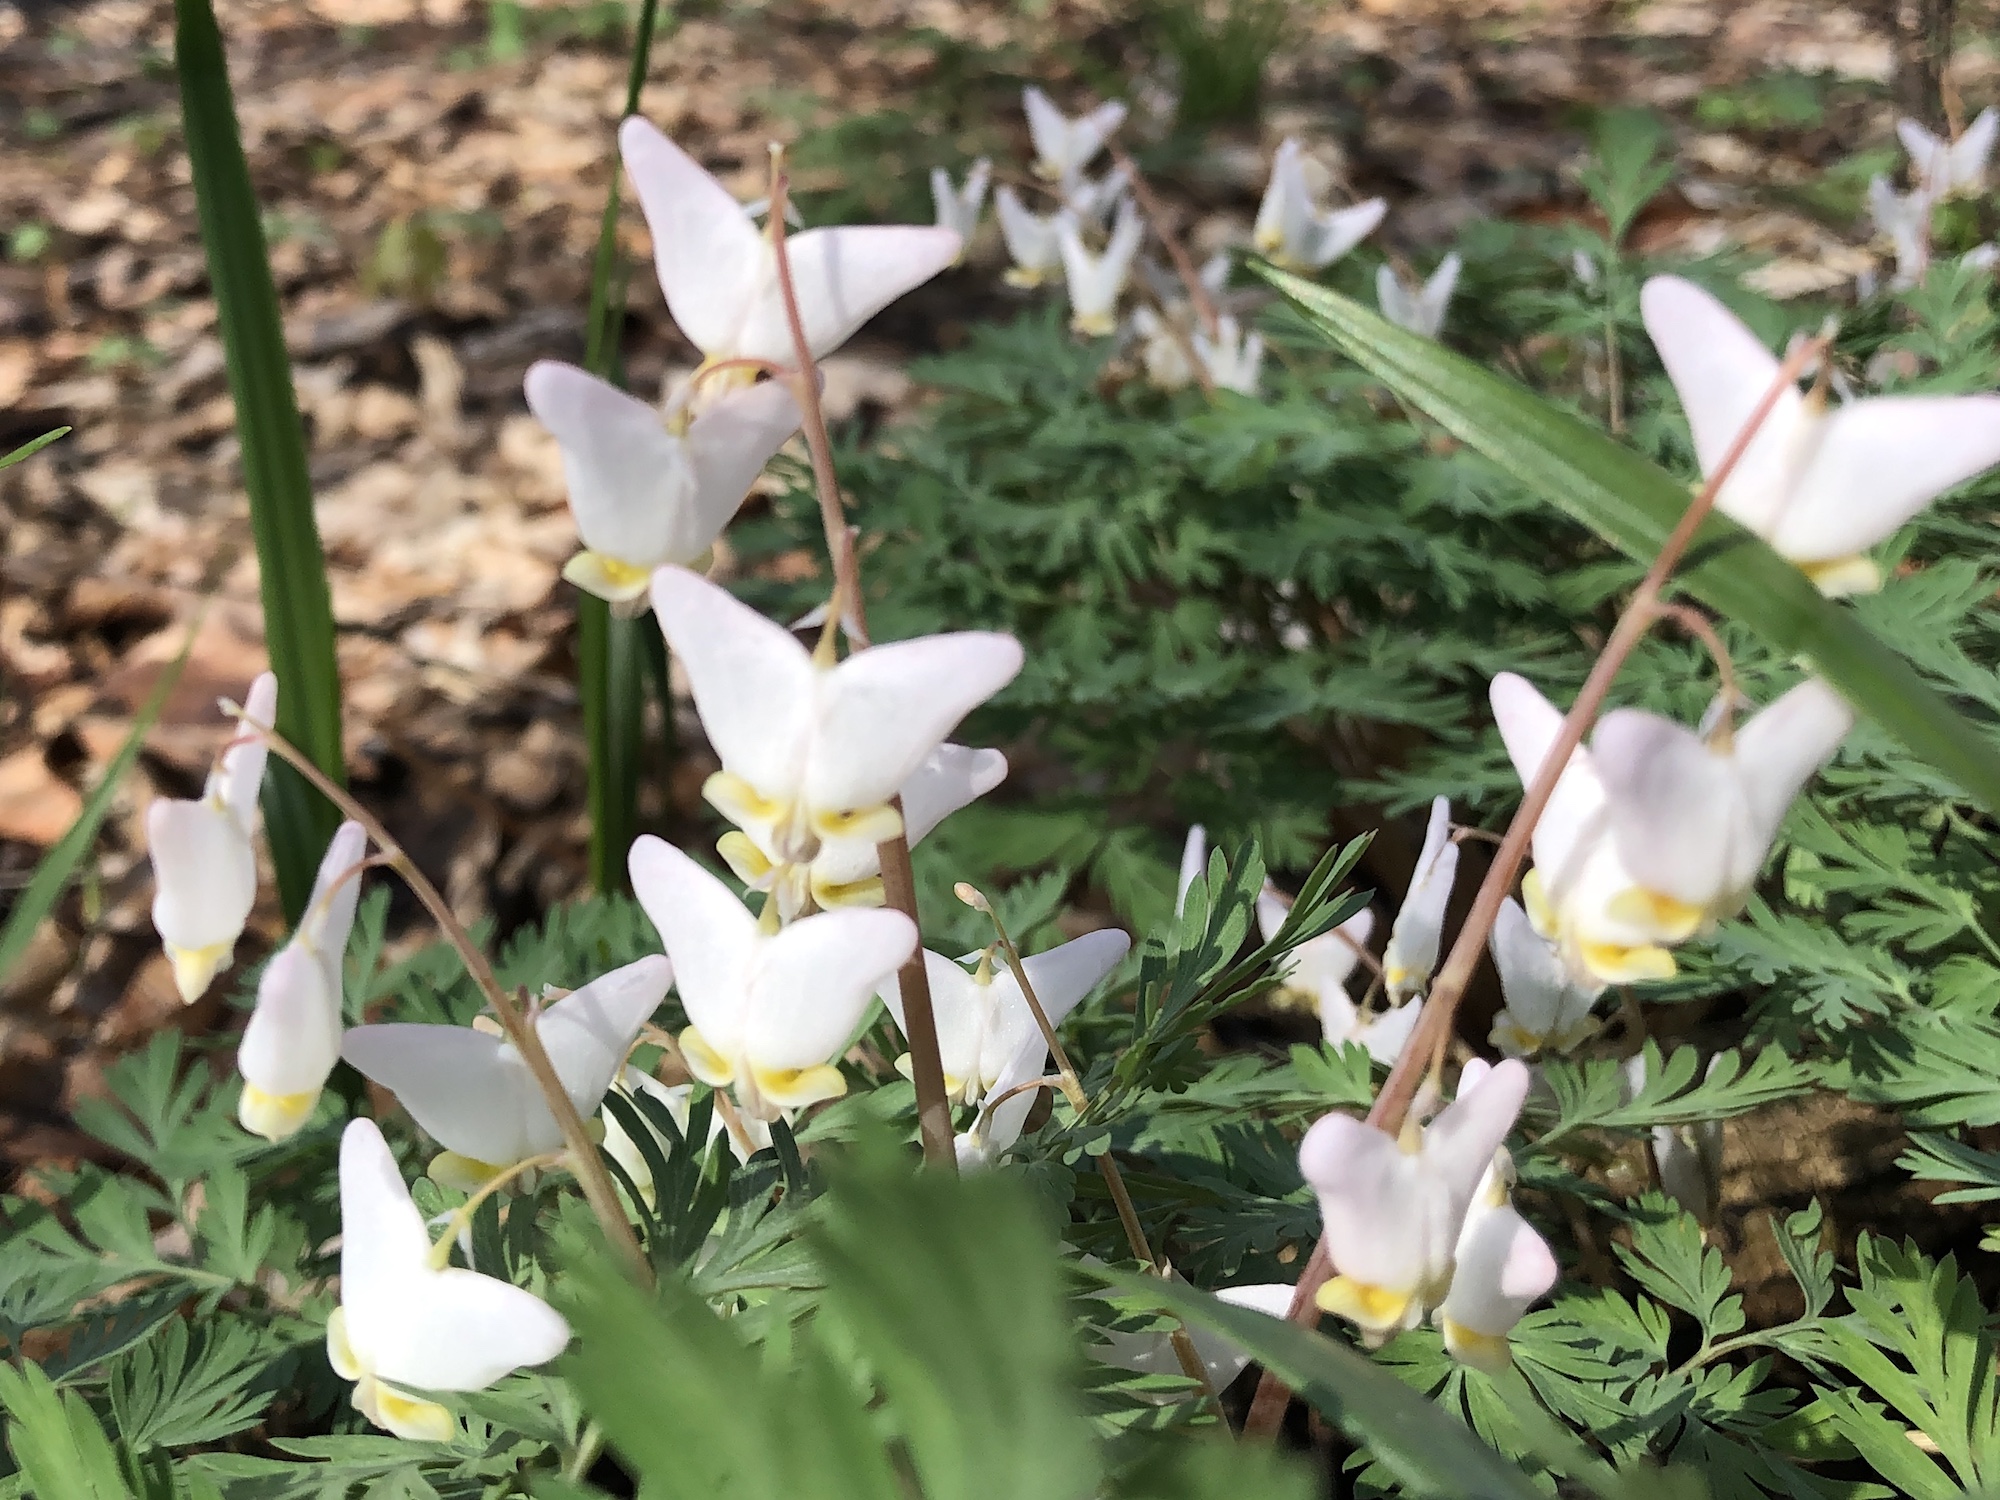 Dutchman's Breeches on April 23, 2019 in woods between Oak Savanna and Marion Dunn.